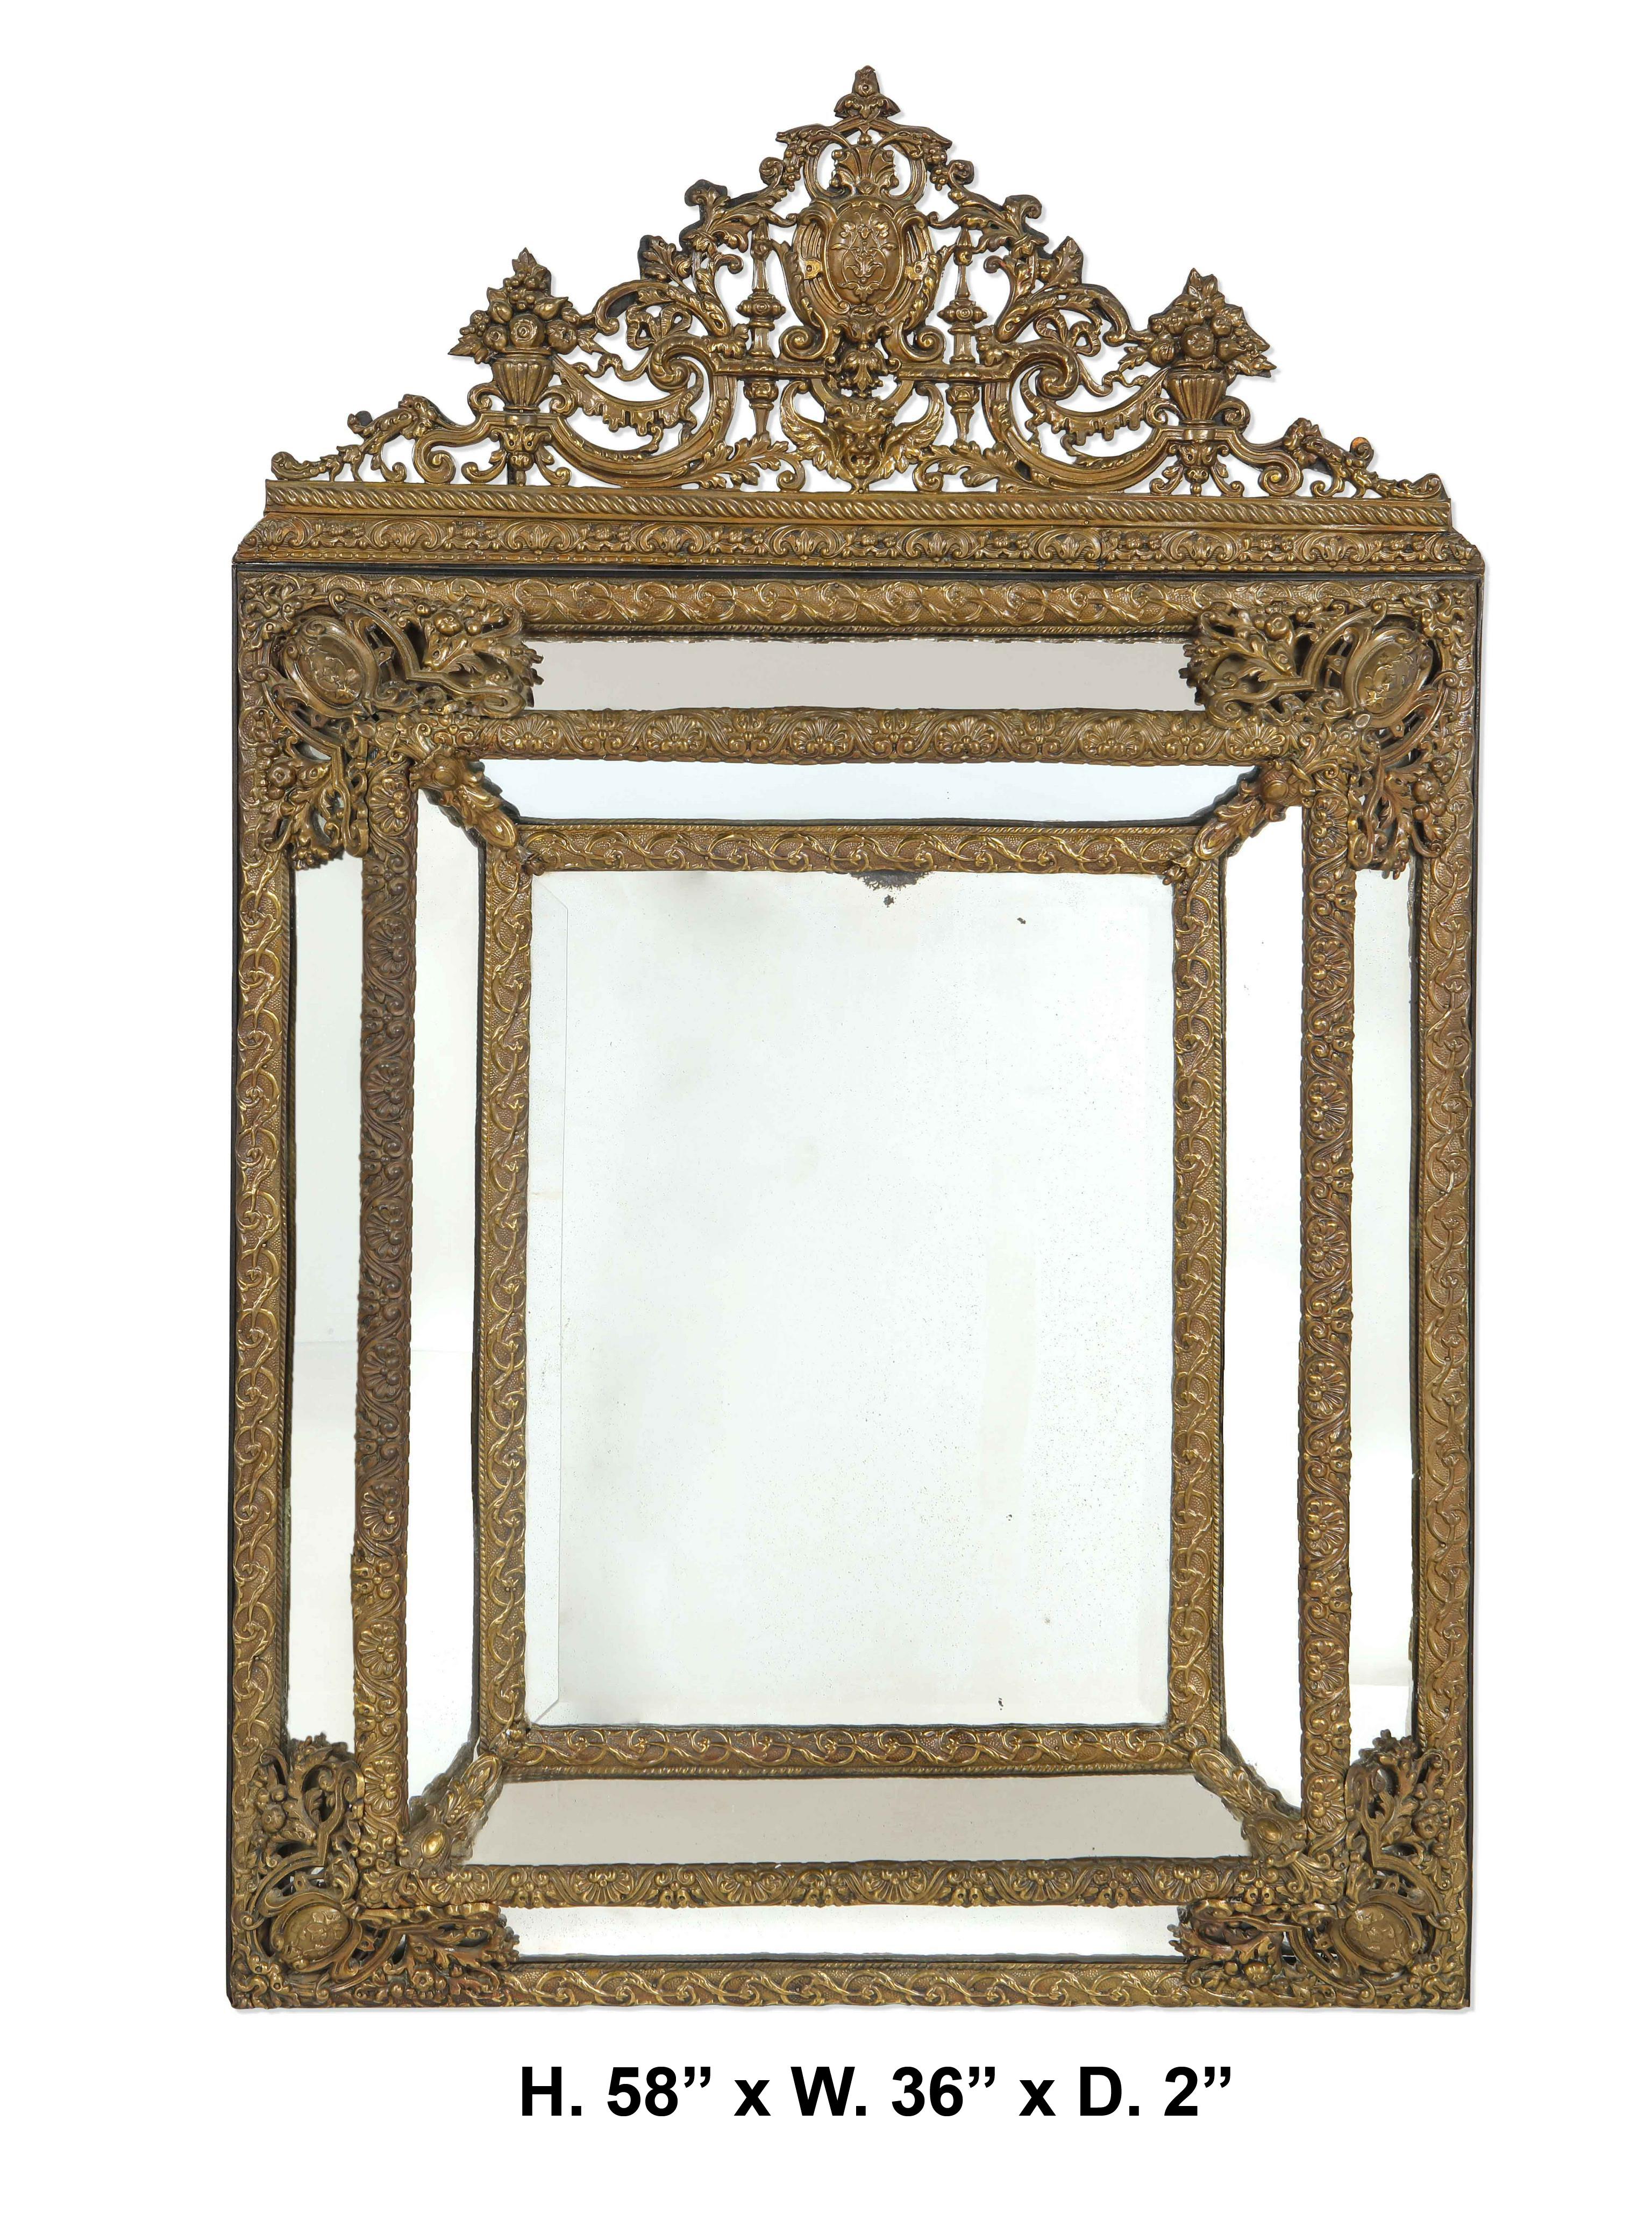 Impressive 19th century Baroque style repousse mirror.
The beautiful brass repousse work with intricate design full of fretwork on ebonized frame and original mirror.